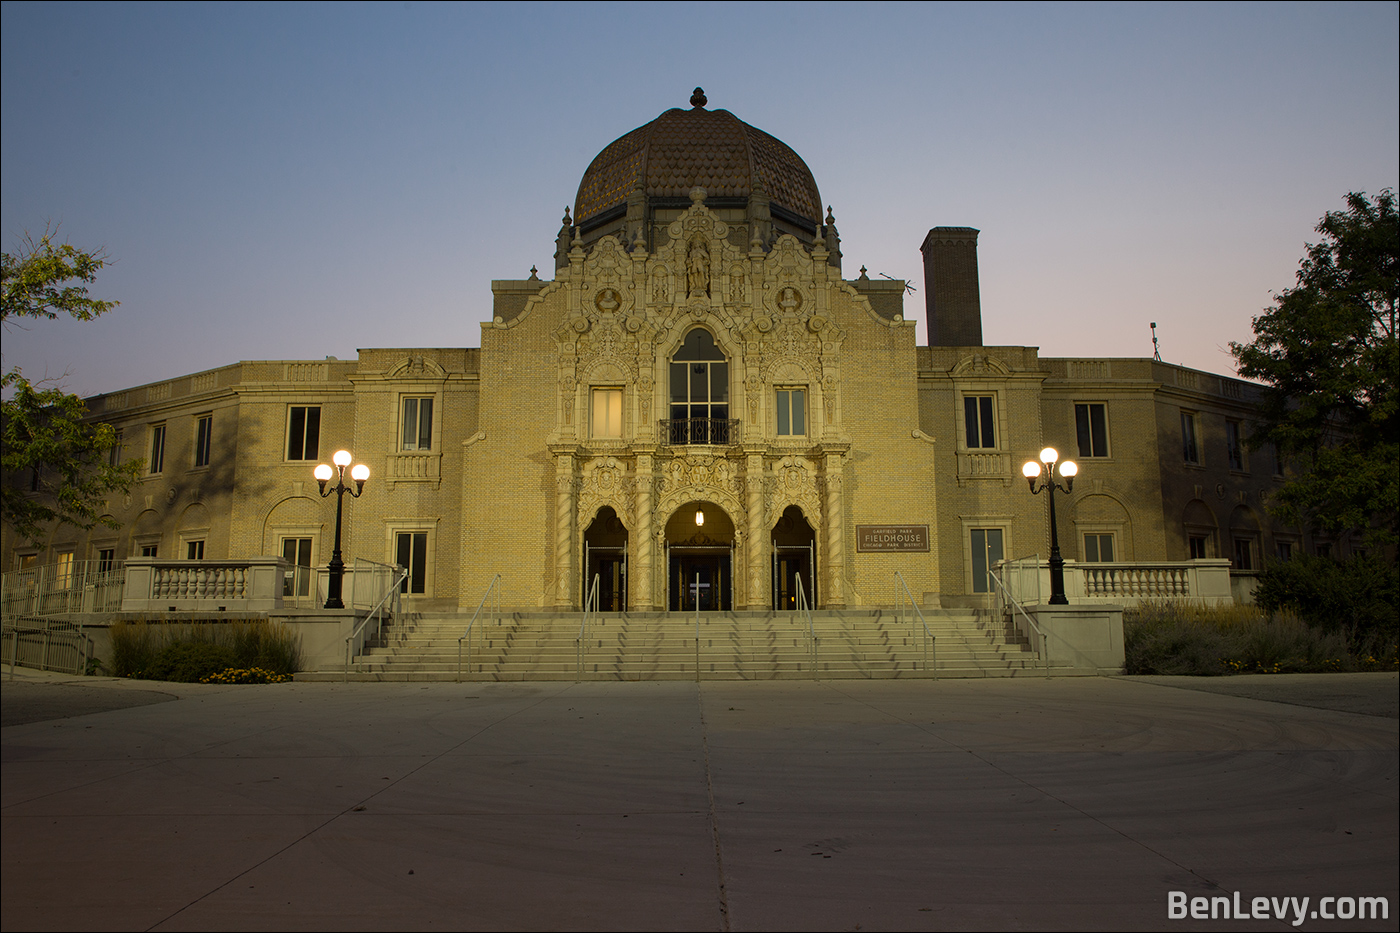 The front of the Garfield Park Fieldhouse at night